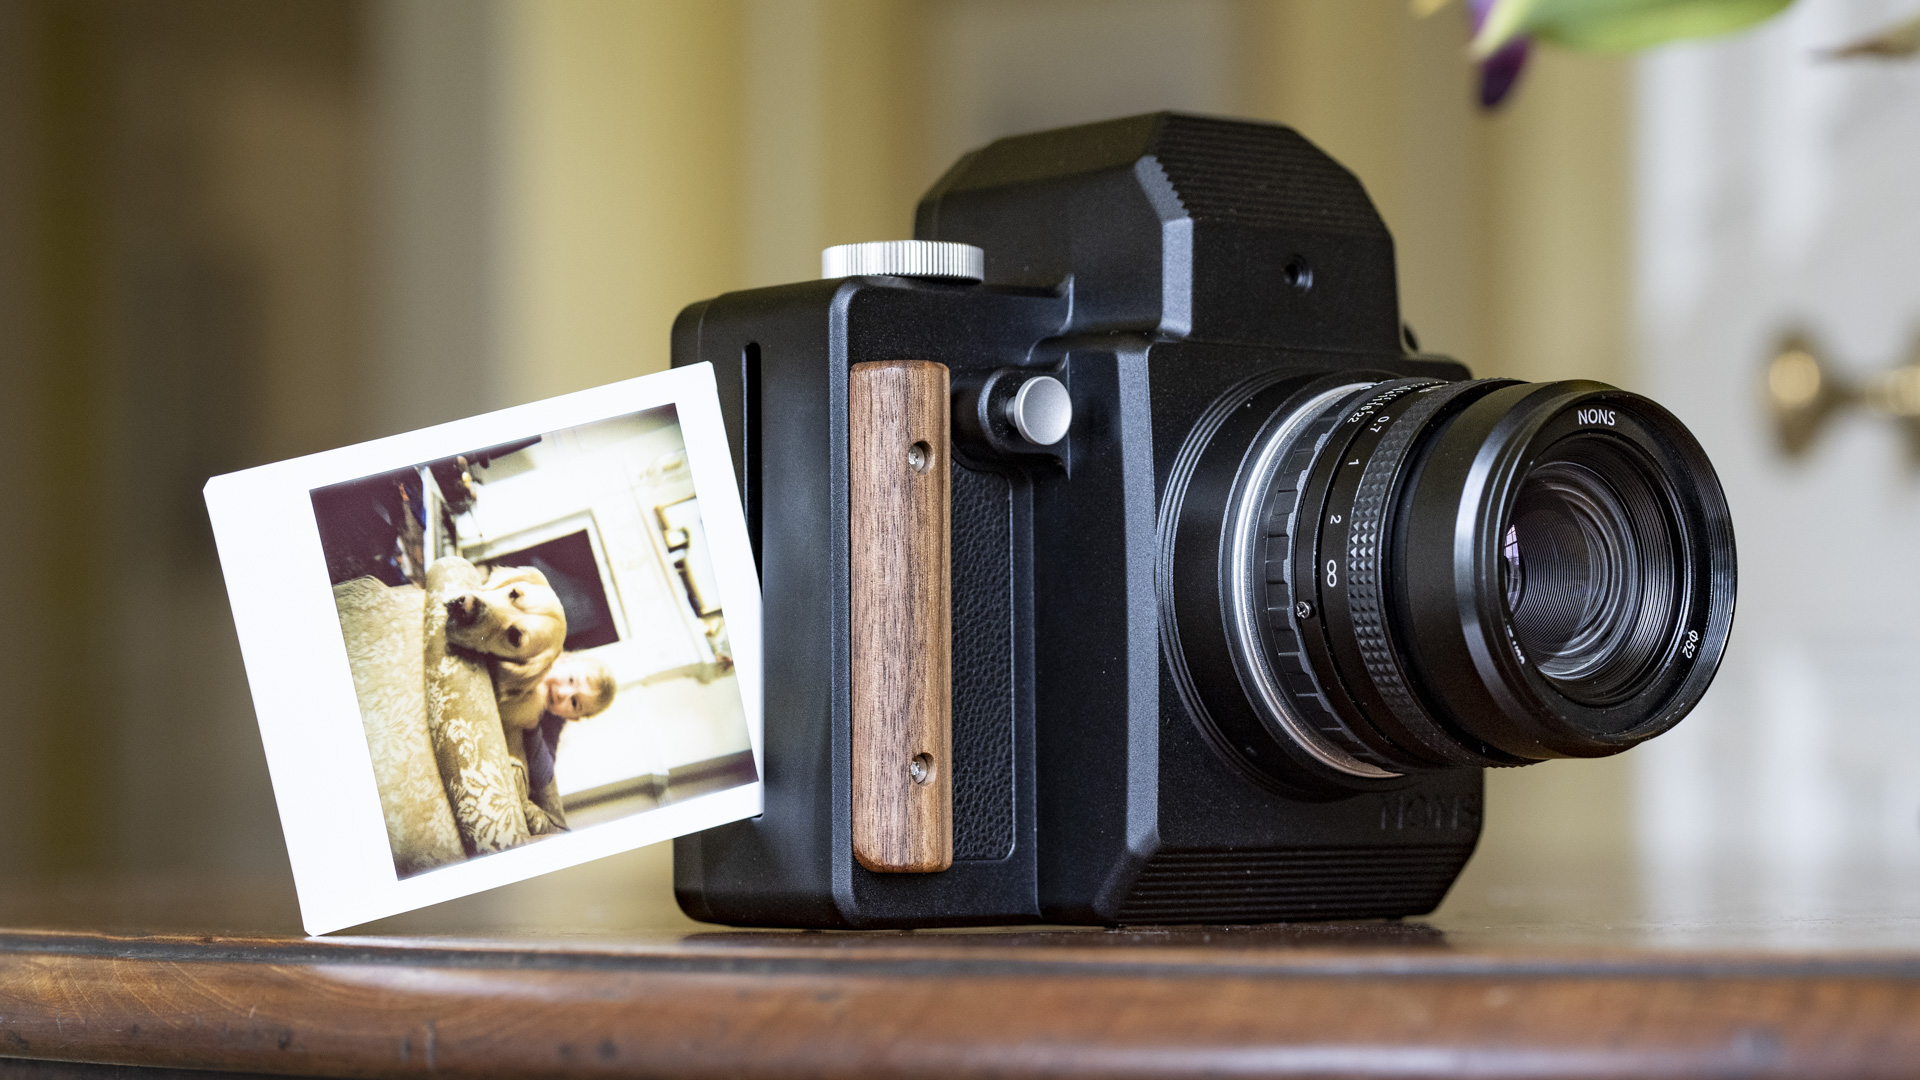 Nons SL660 instant camera with instant print ejected